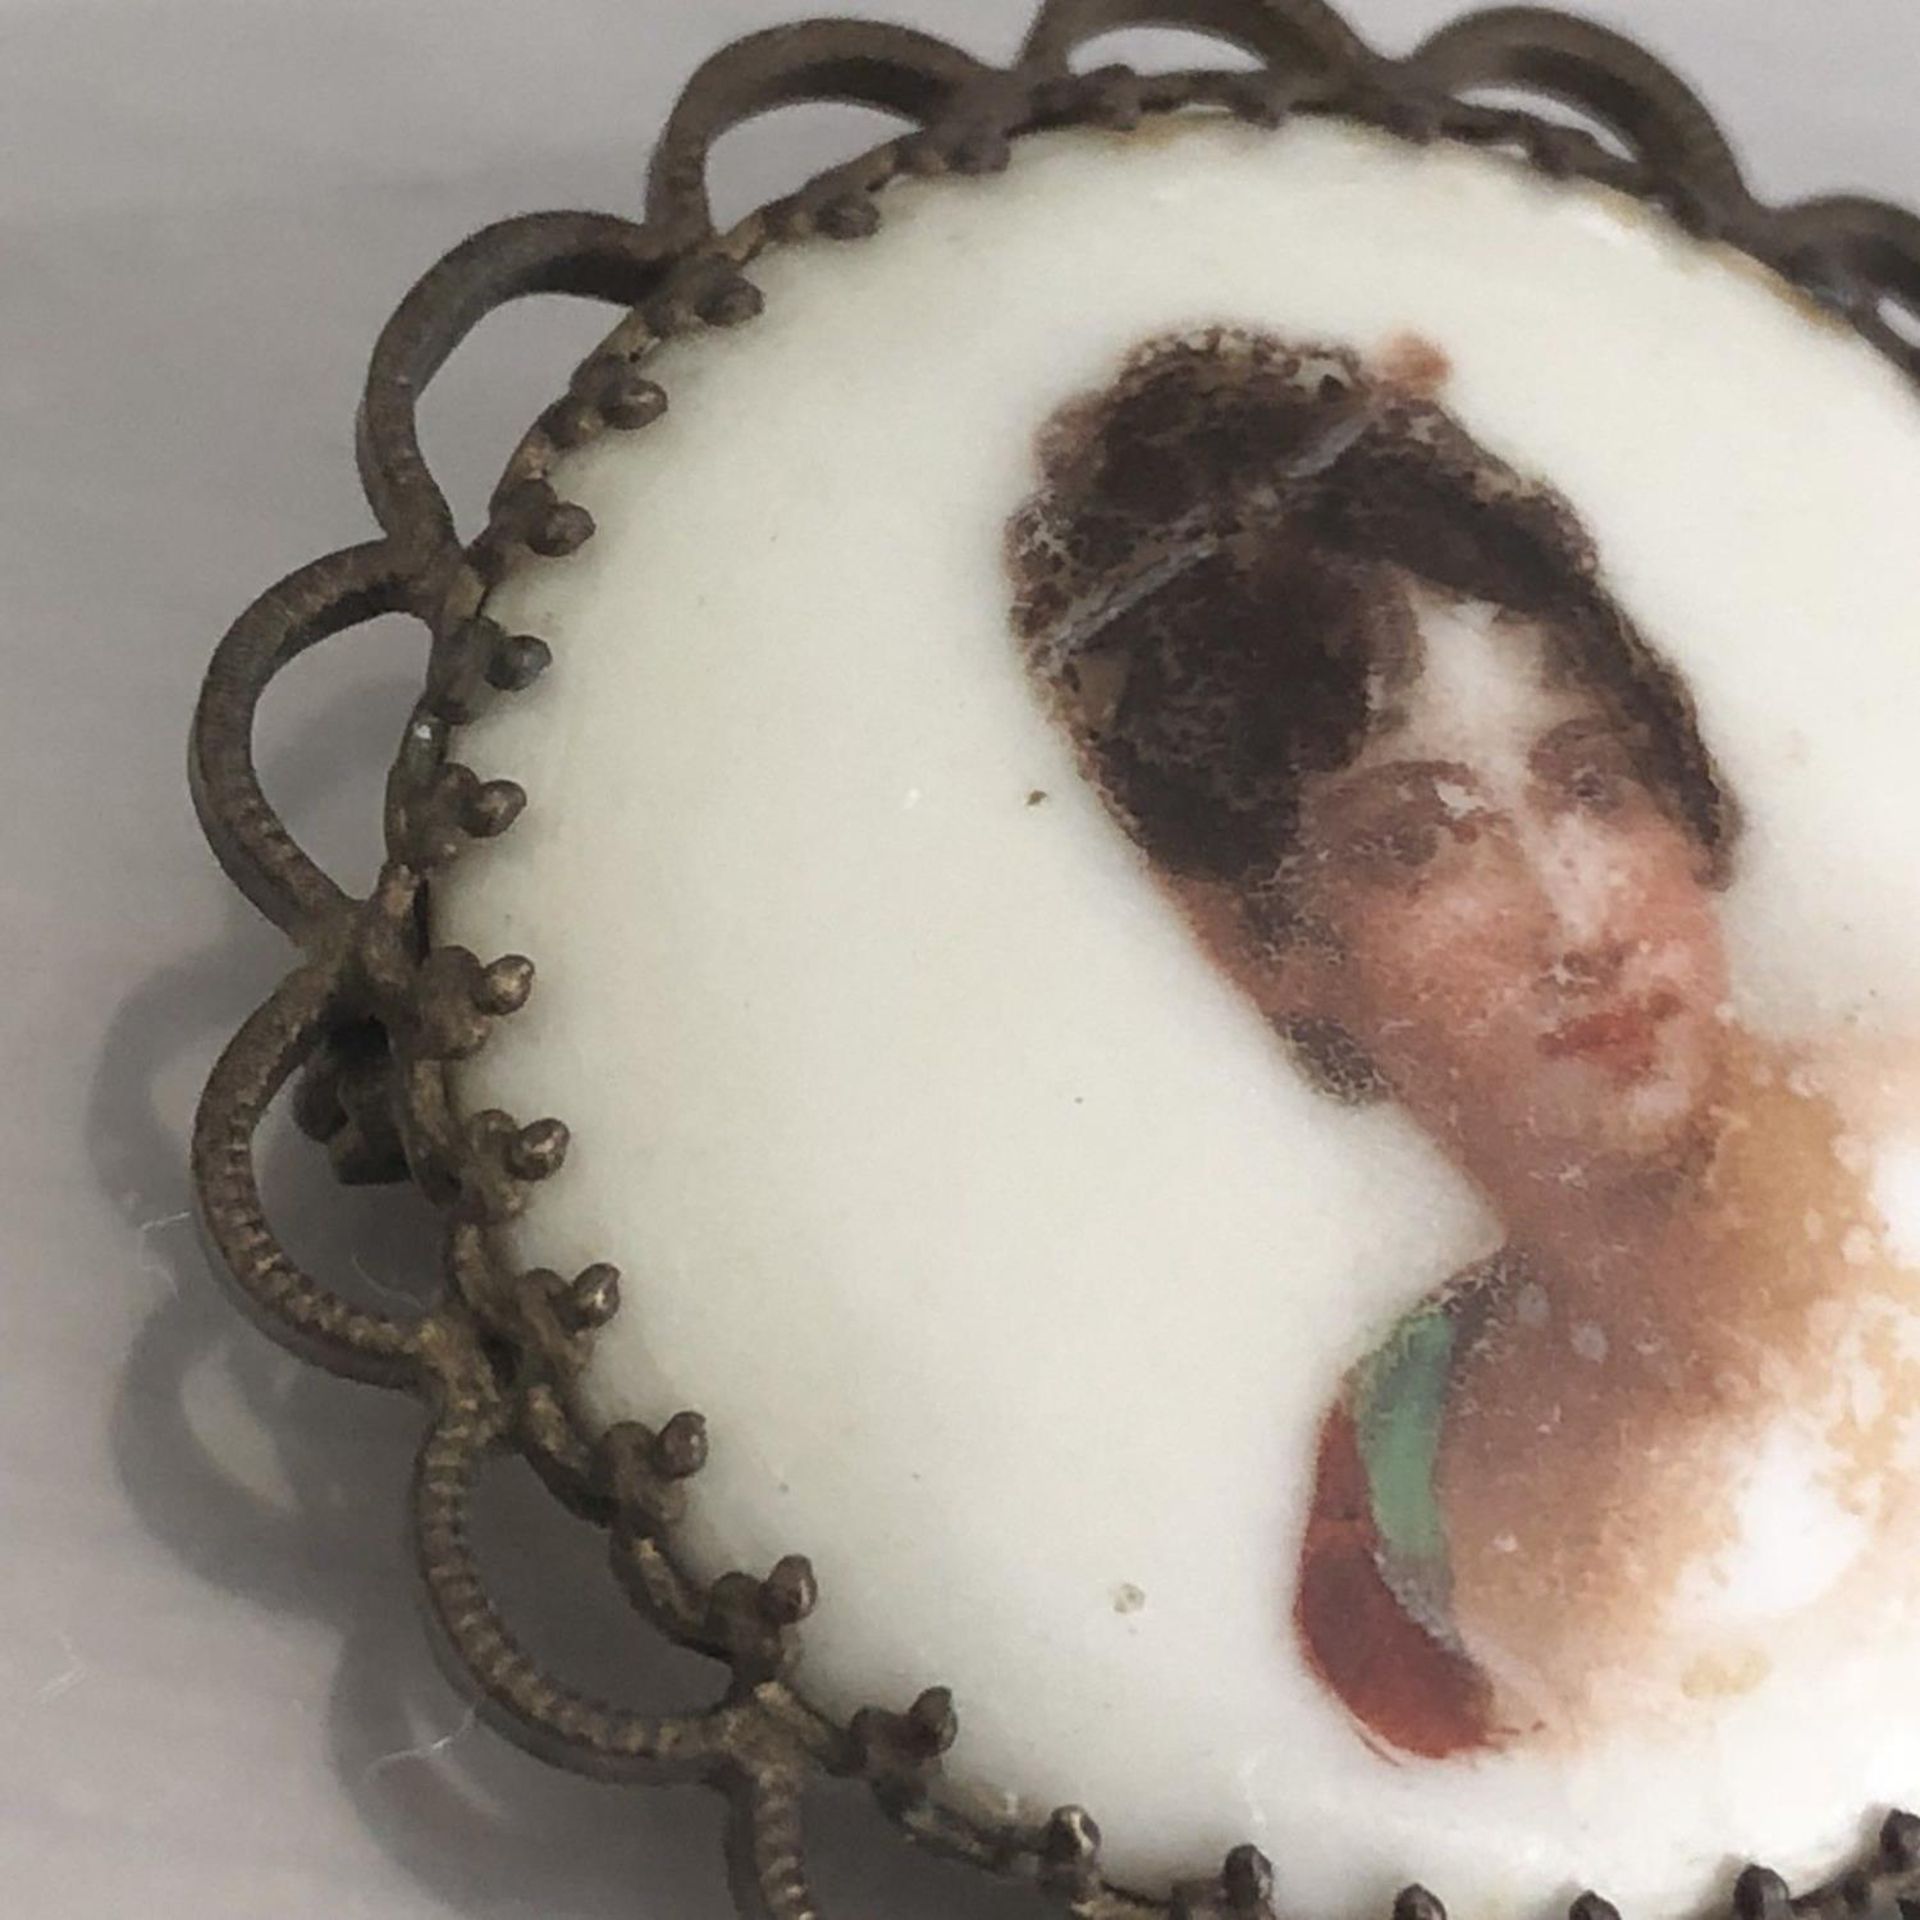 Antique Edwardian or Victorian brooch with painted porcelain portrait of a lady - Image 3 of 3